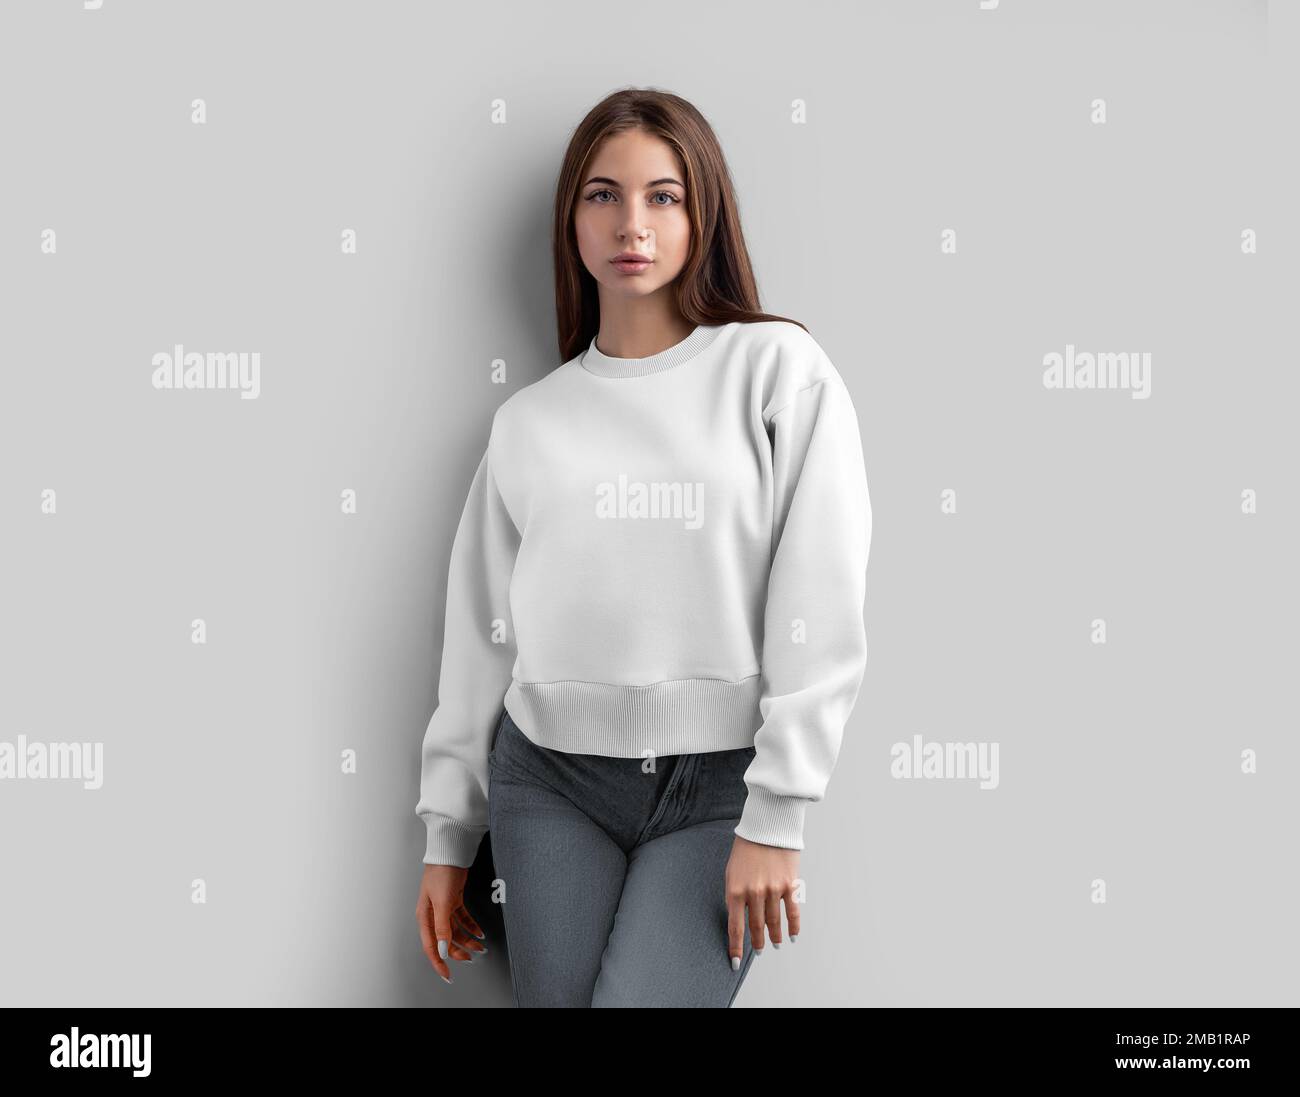 Template of a white crop shirt on a girl, looking straight ahead, a sweatshirt is isolated on the background, front view. Mockup women's apparel, clot Stock Photo